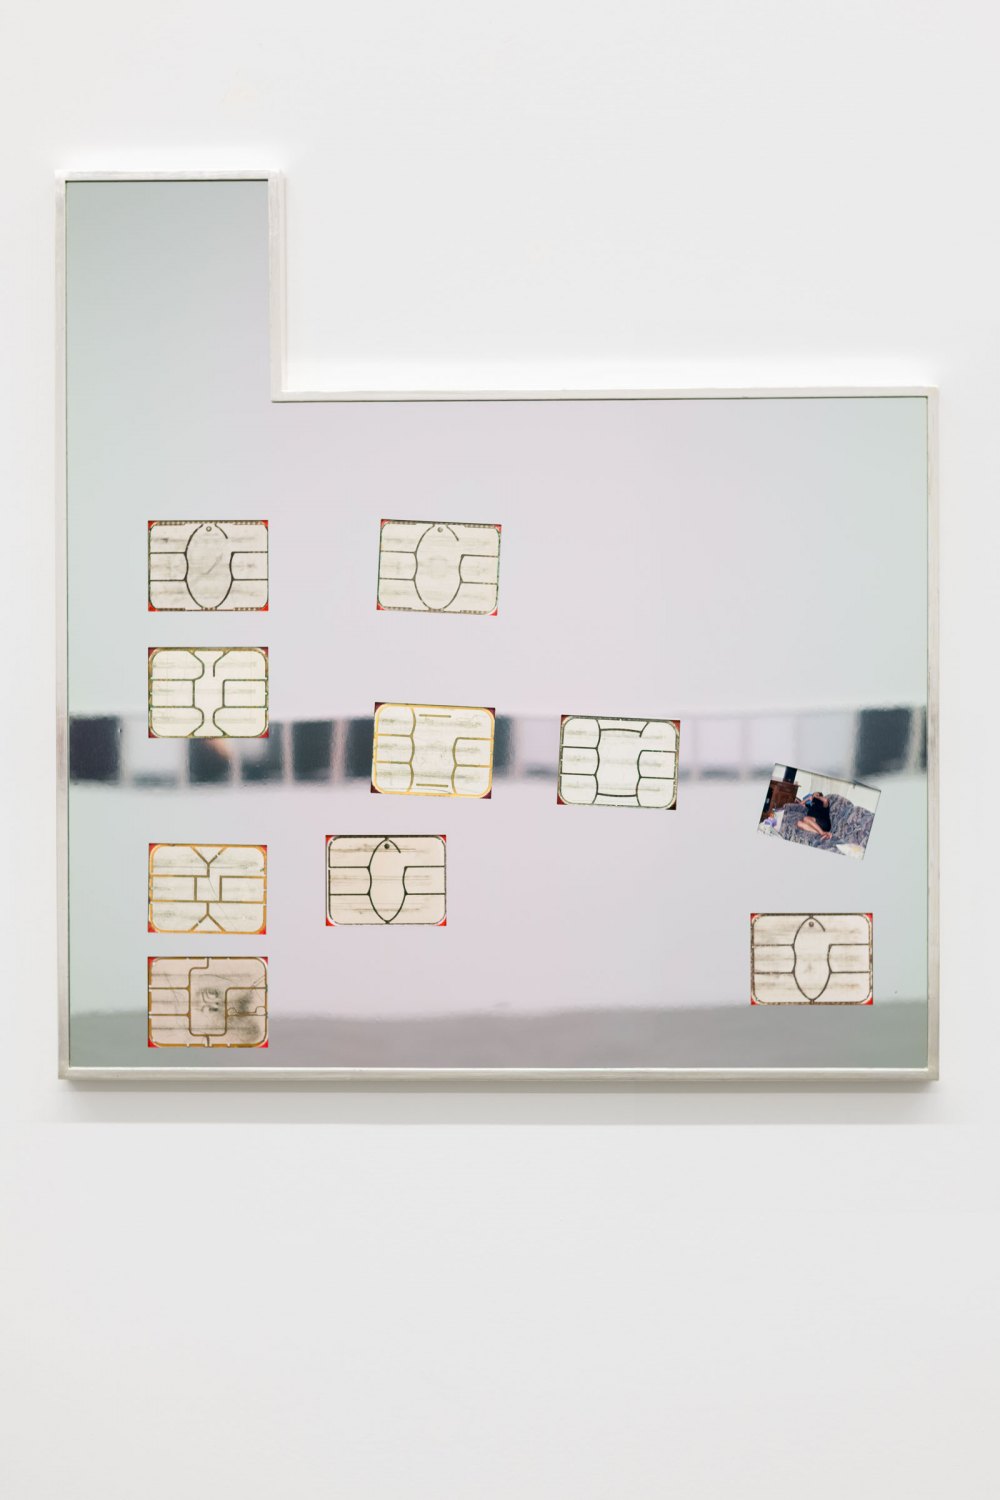 SoiL Thornton Flagged Identity (5), 2021 Archival pigment prints of my active and inactive bank cards chips, found photo, mirror finished stainless steel, and white gold leafed frame 126 x 121.5 x 6 cm